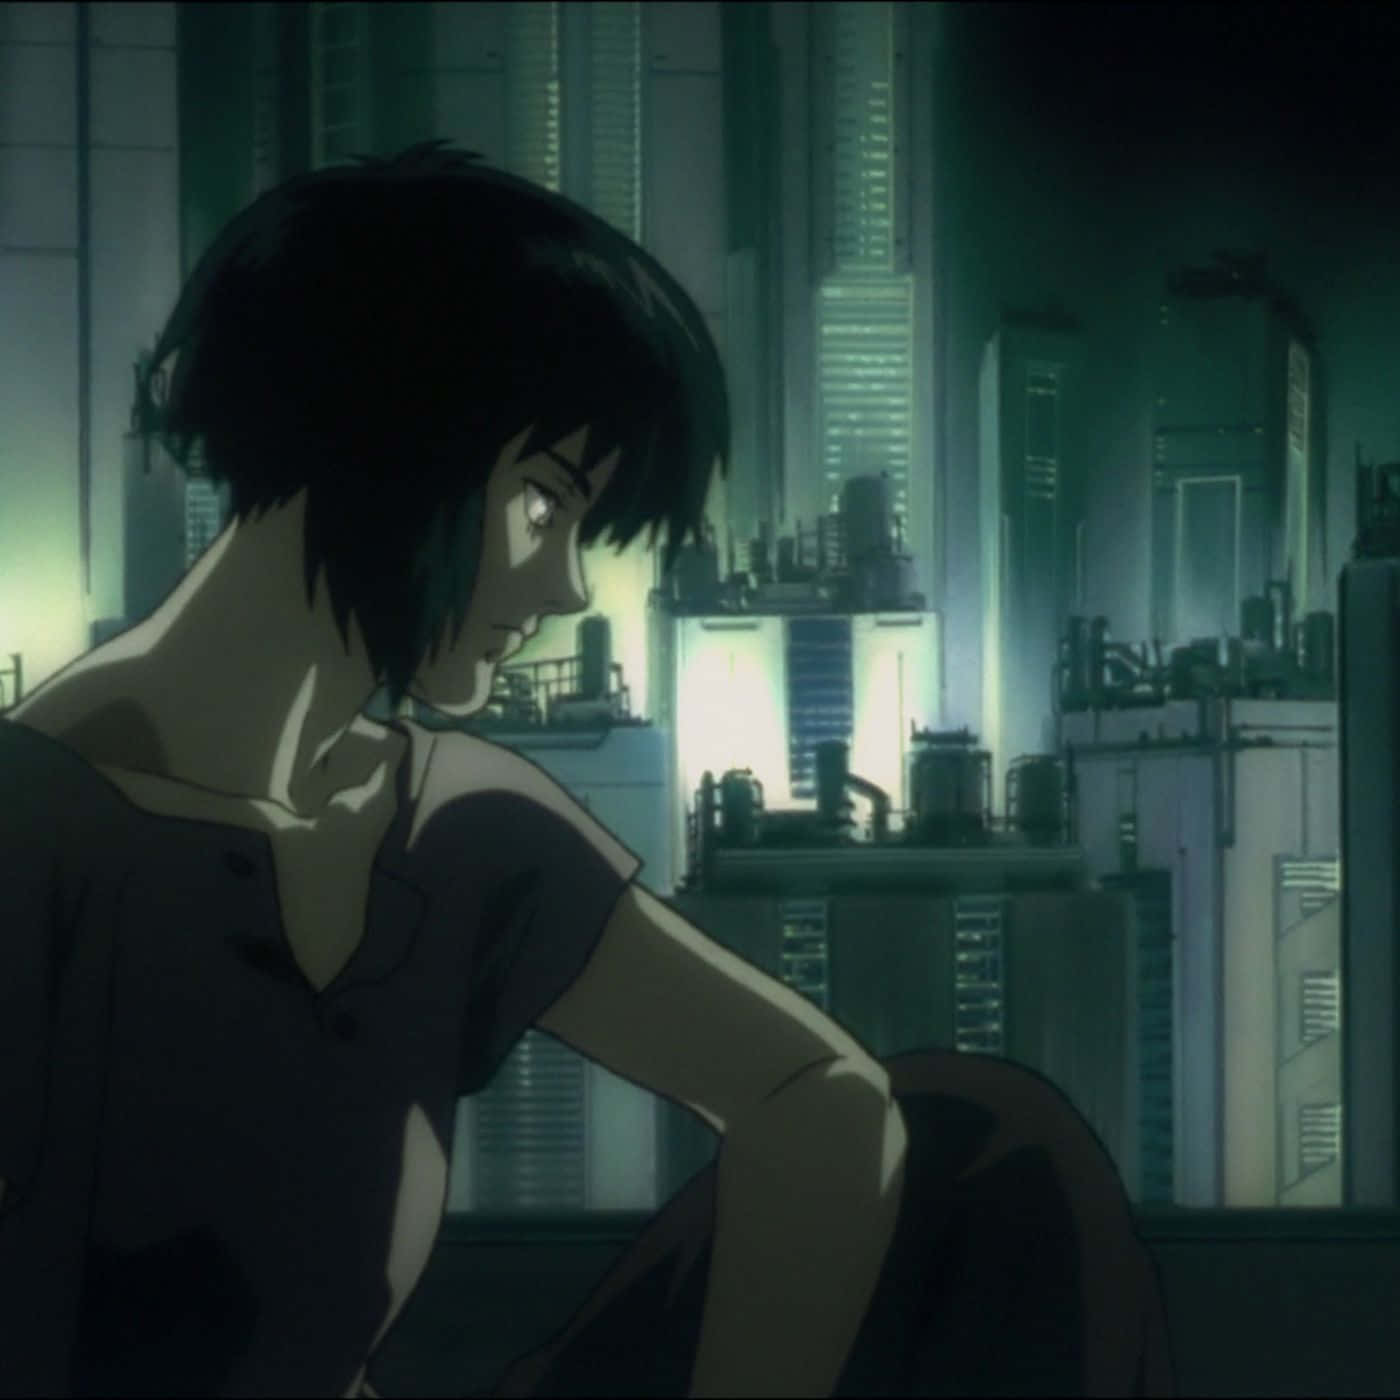 'ghostin The Shell' Would Be Translated As 'fantasma Nella Scatola'. However, If You Are Referring To The Title Of The Iconic Japanese Manga And Anime Series, It Remains The Same In Italian As 'ghost In The Shell'.